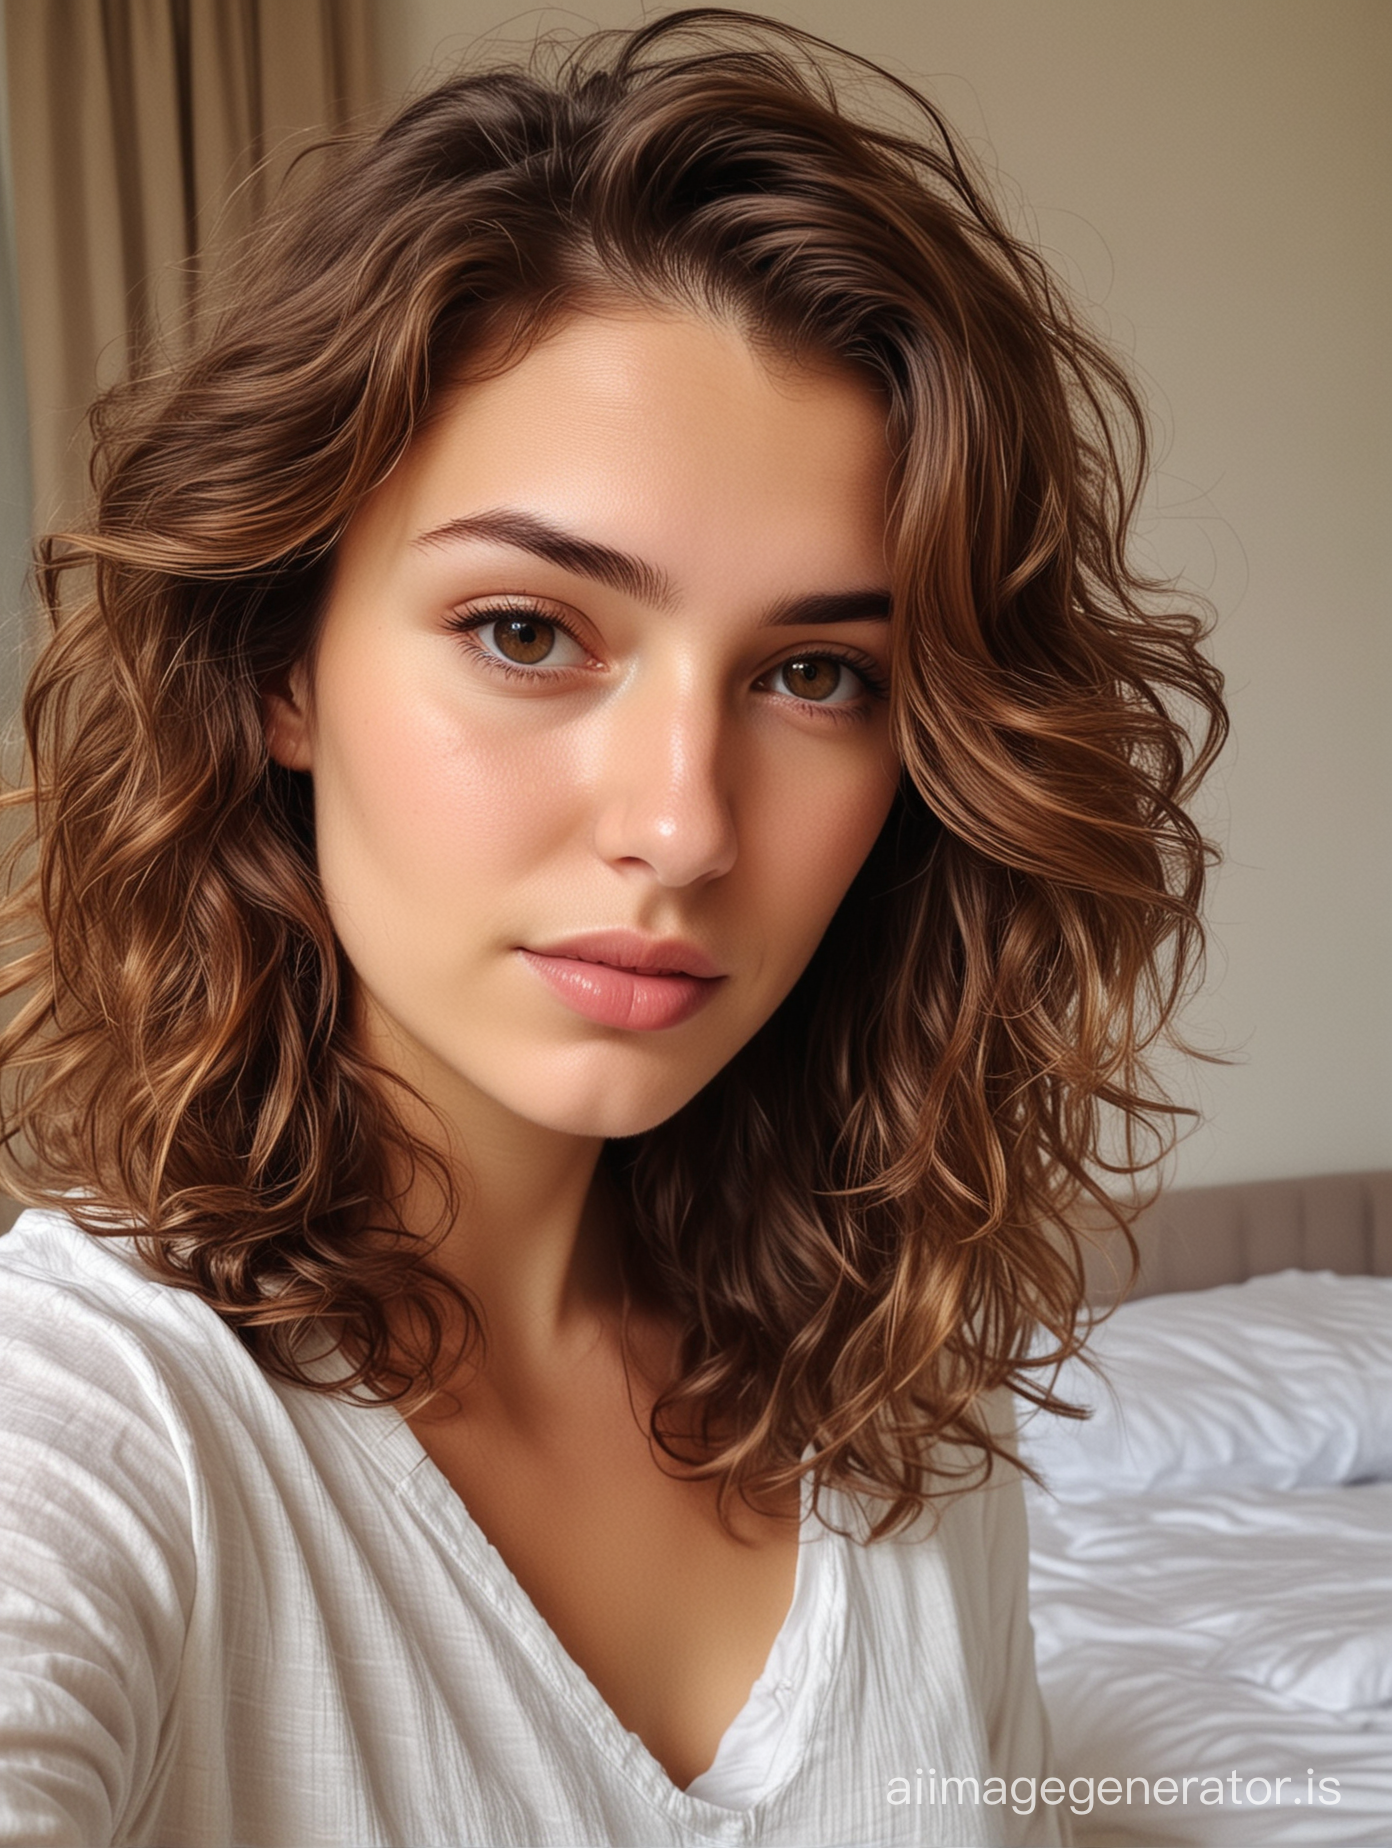 a photo of michela an italian prosperous girl just came back home from college with brown wavy hair taking a self picture after waking up in early morning in the bedroom